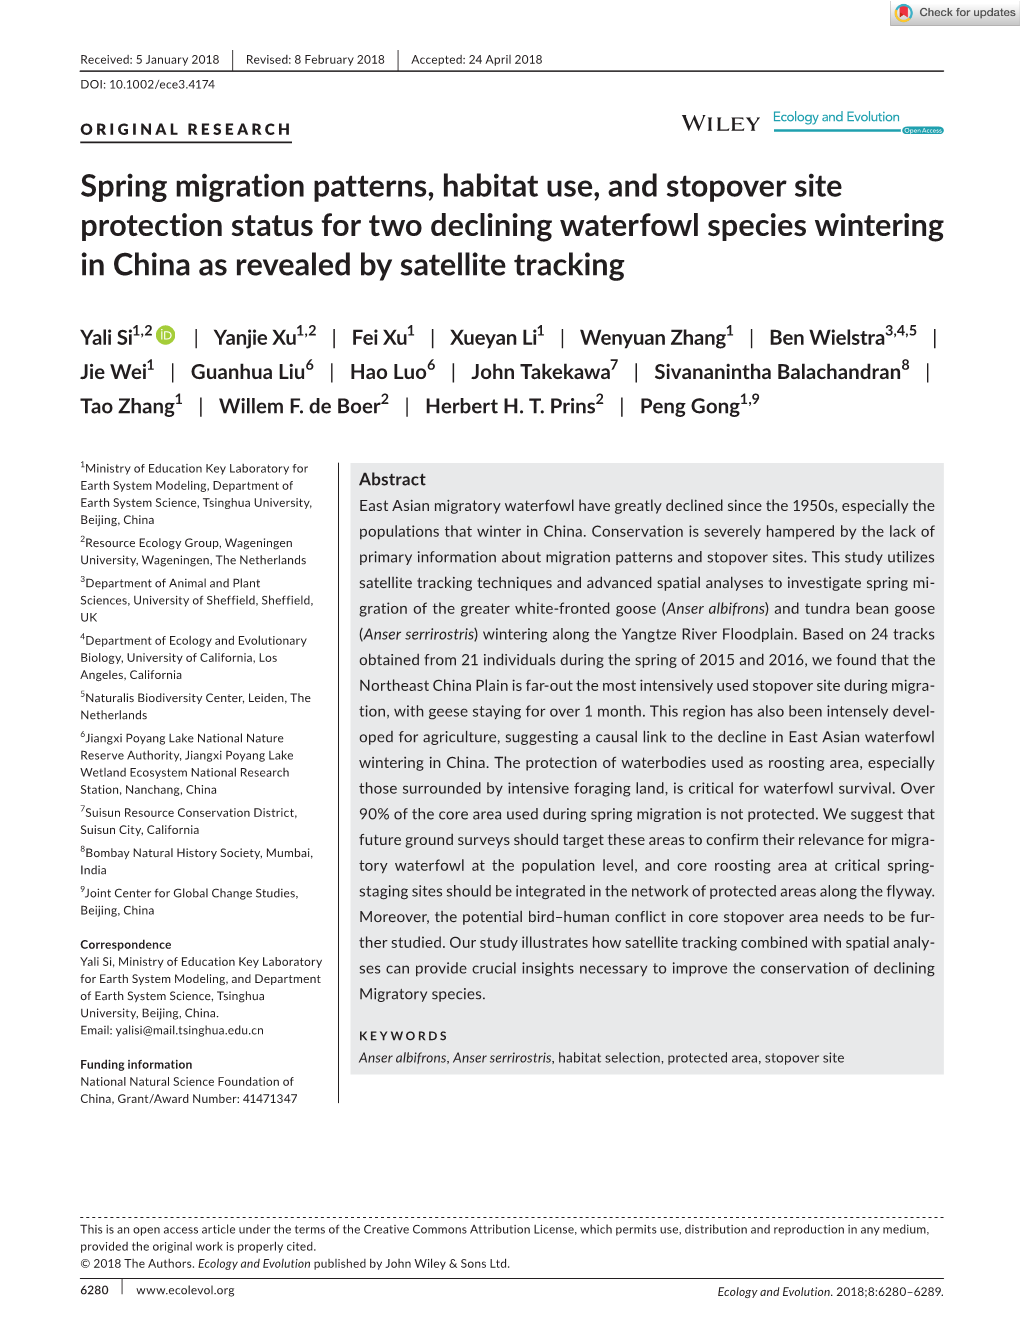 Spring Migration Patterns, Habitat Use, and Stopover Site Protection Status for Two Declining Waterfowl Species Wintering in China As Revealed by Satellite Tracking